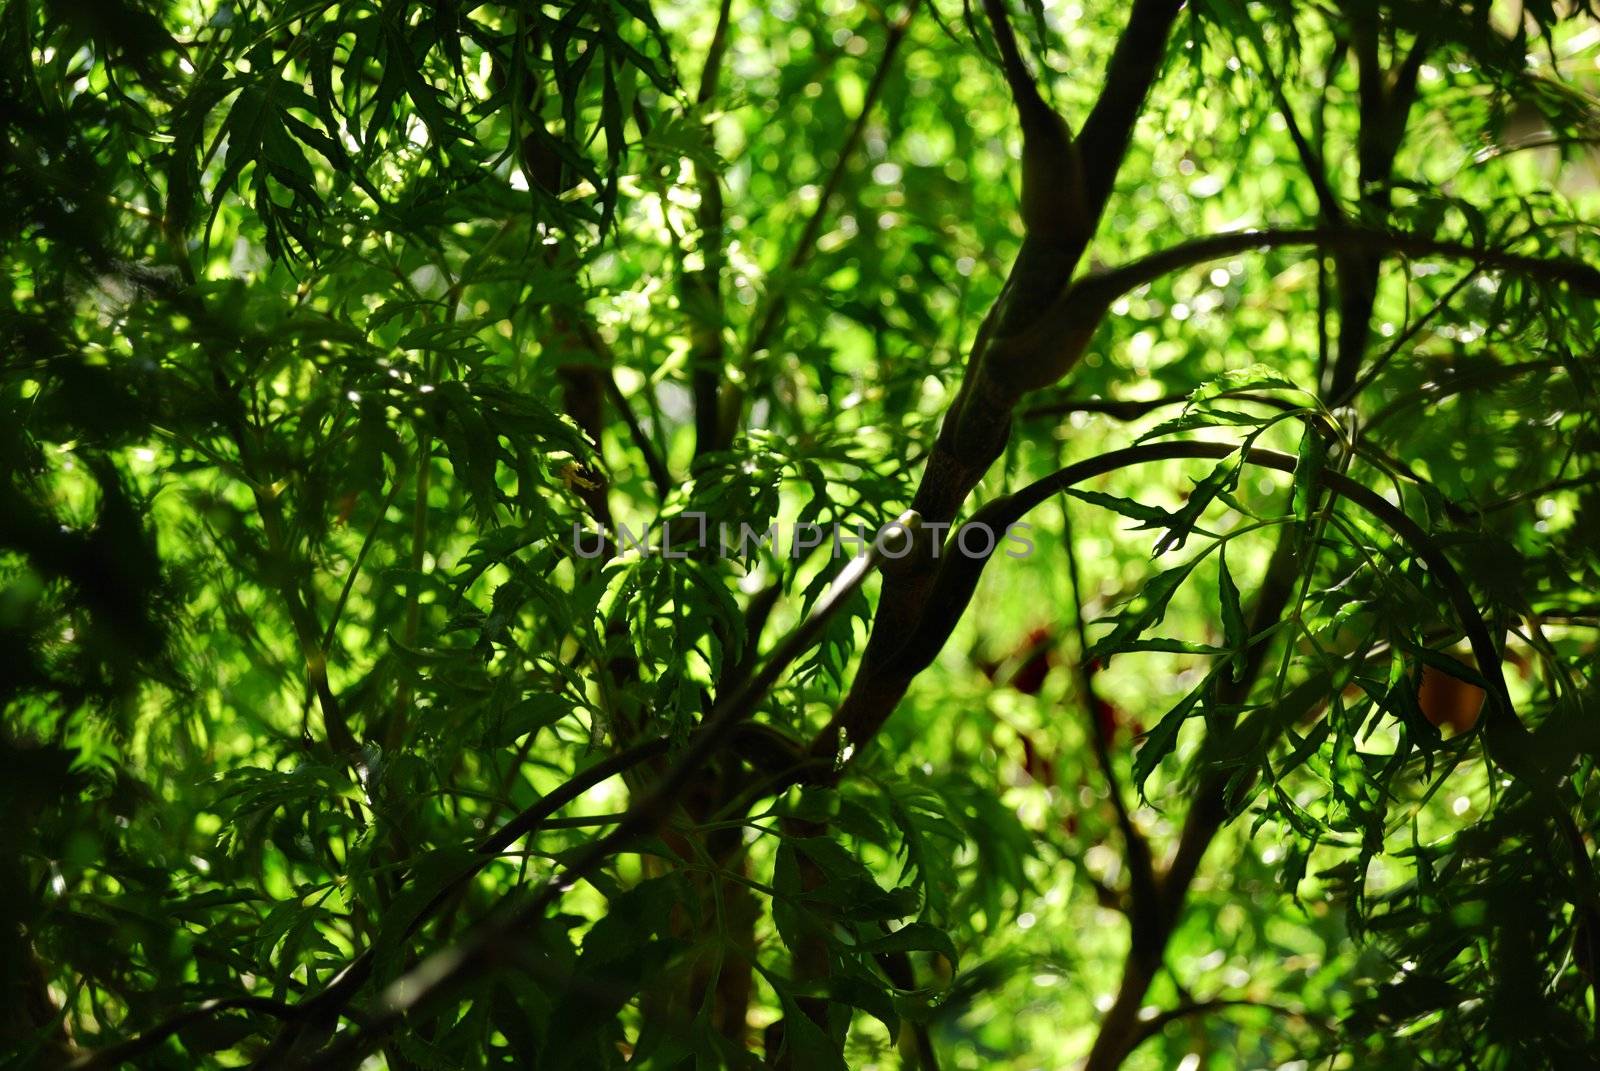 Green vegetative background without focus objects on black